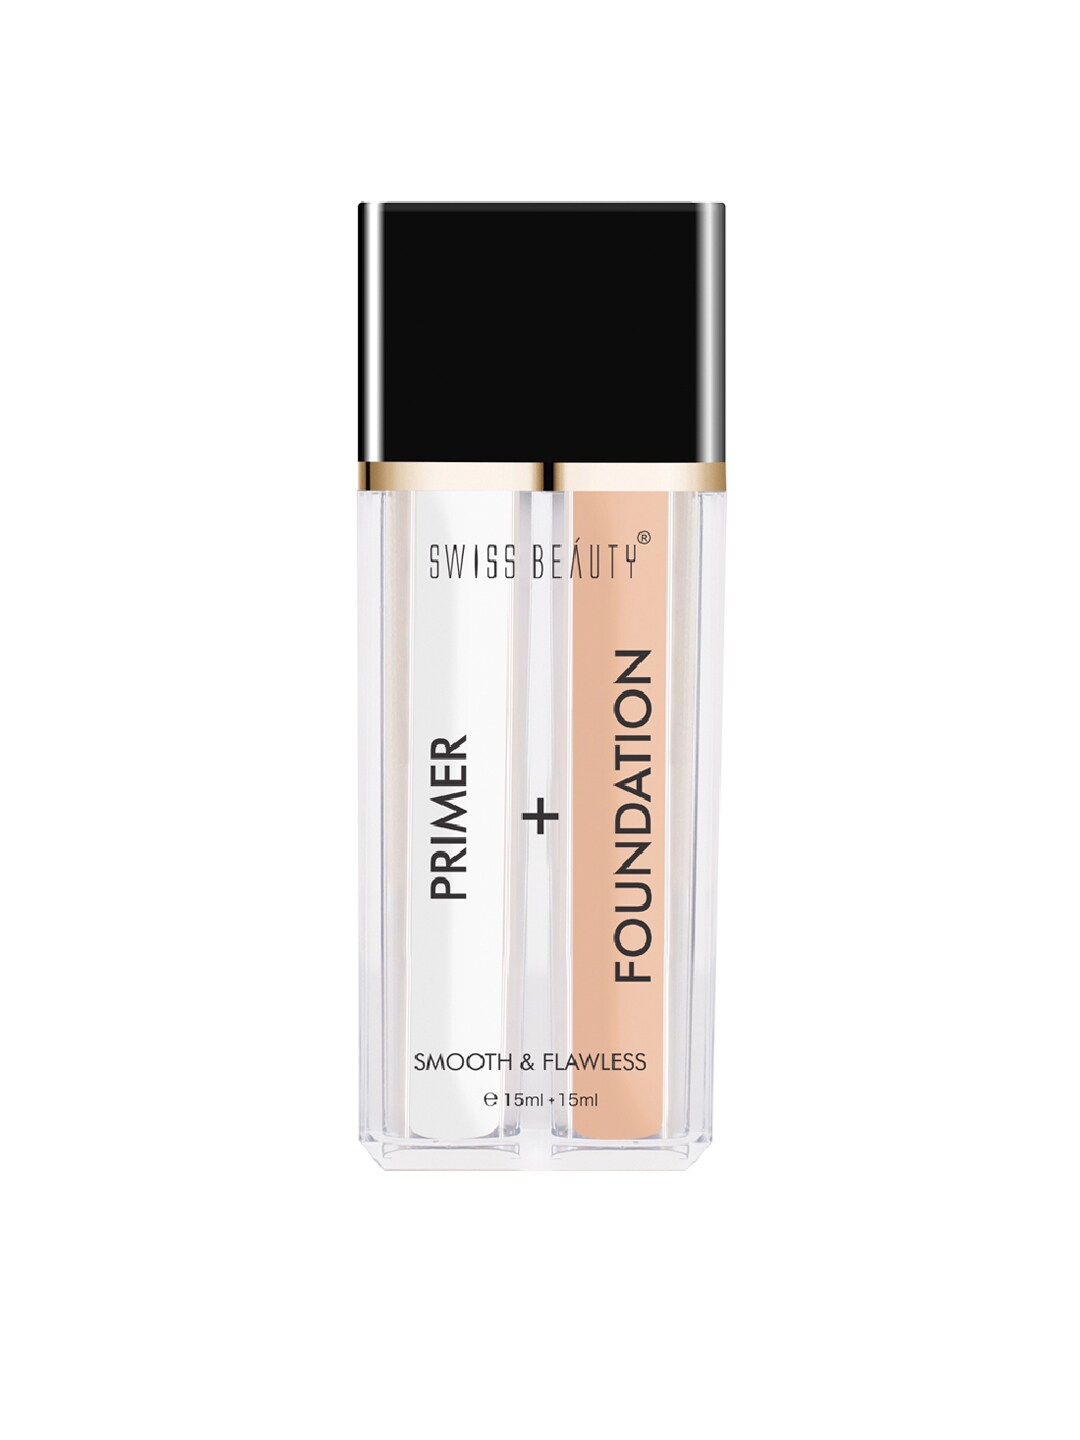 SWISS BEAUTY Primer + Foundation - Ivory 01 Price in India